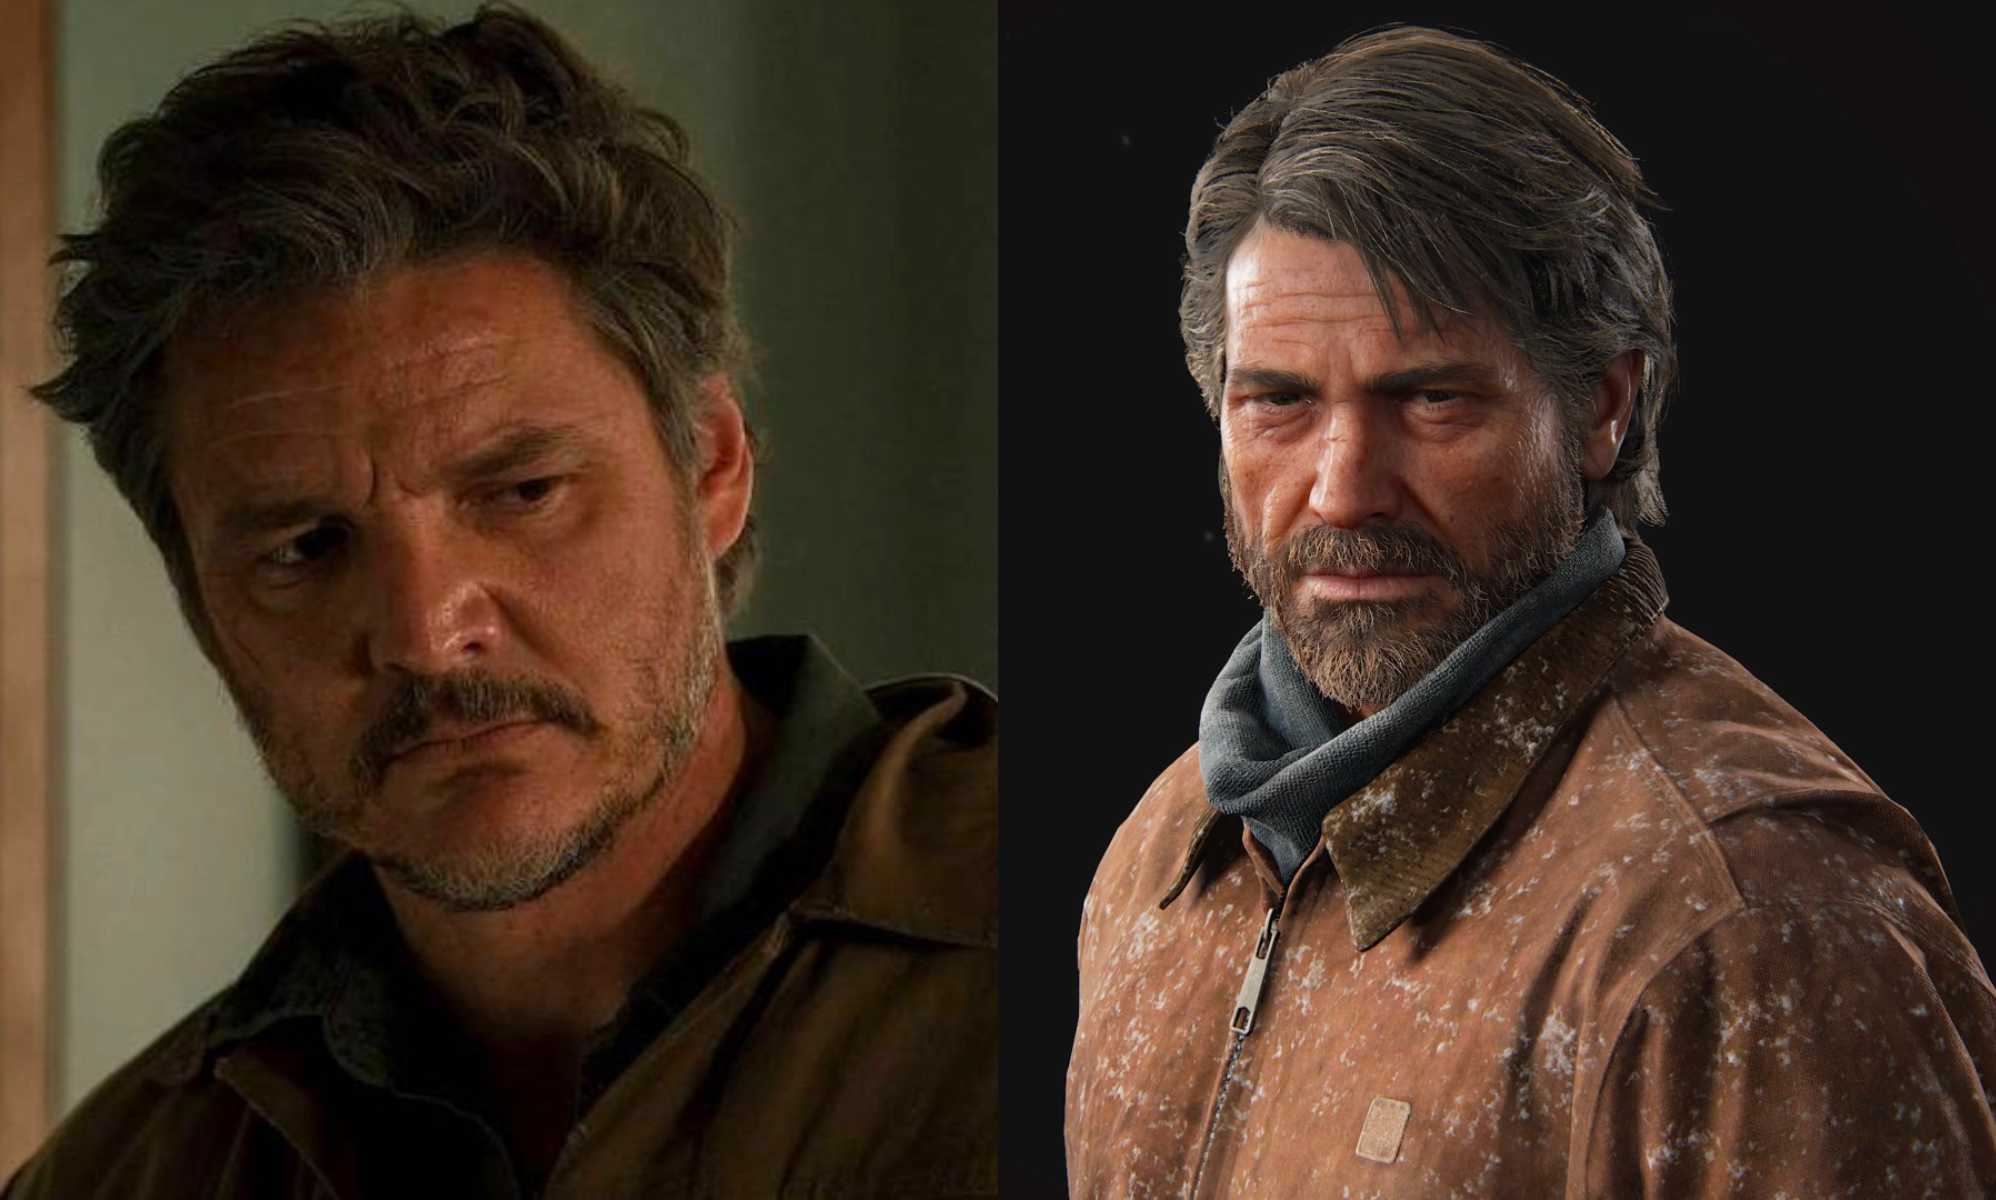 The Last Of Us adds Pedro Pascal as Joel just after Bella Ramsey signs on  as Ellie